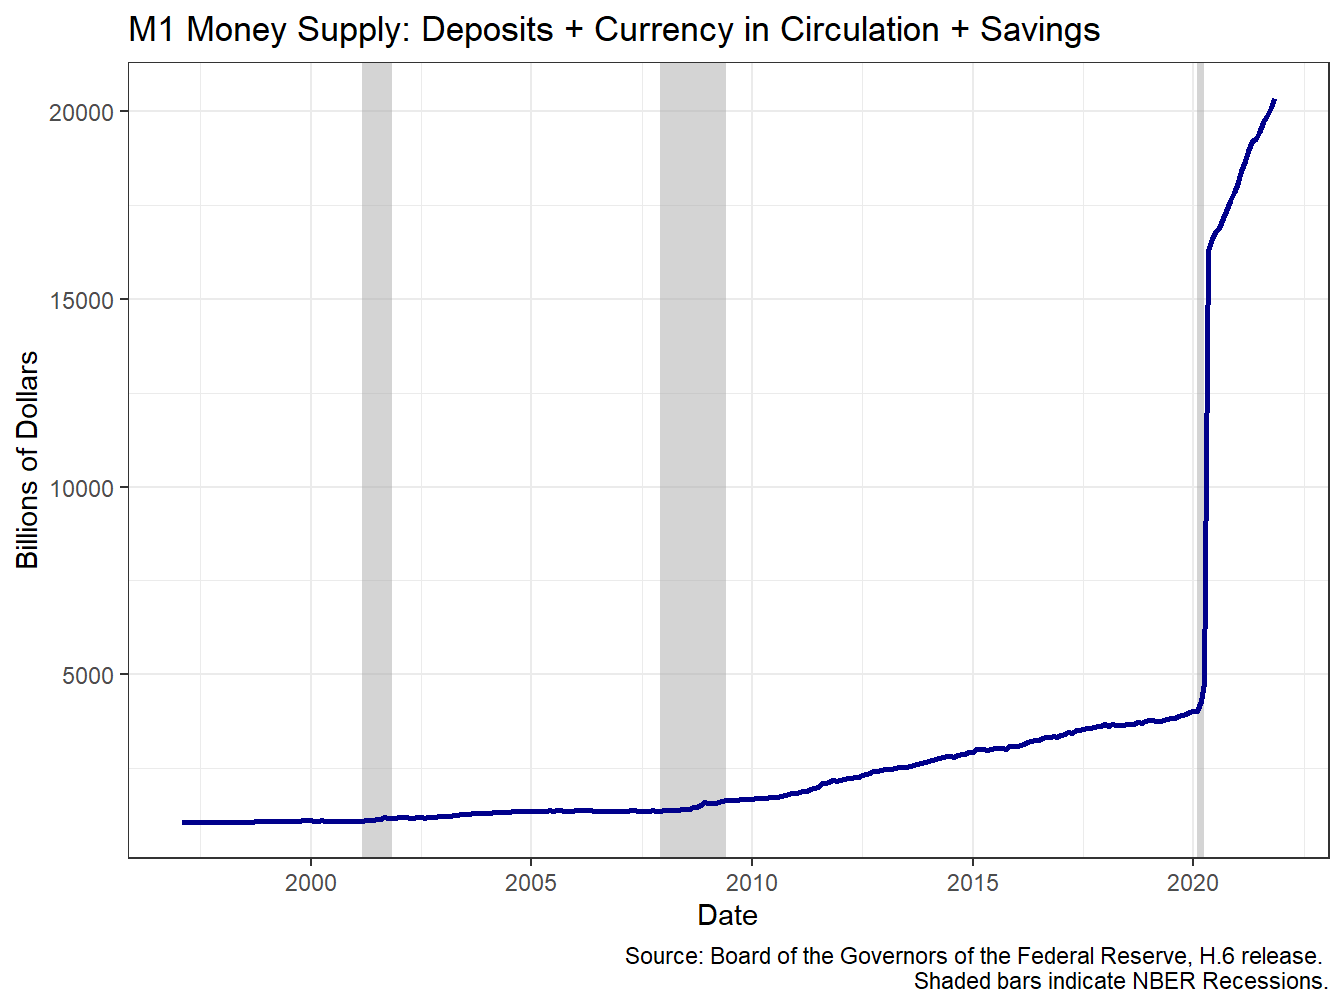 The M1 Money Supply Has Grown Over Time